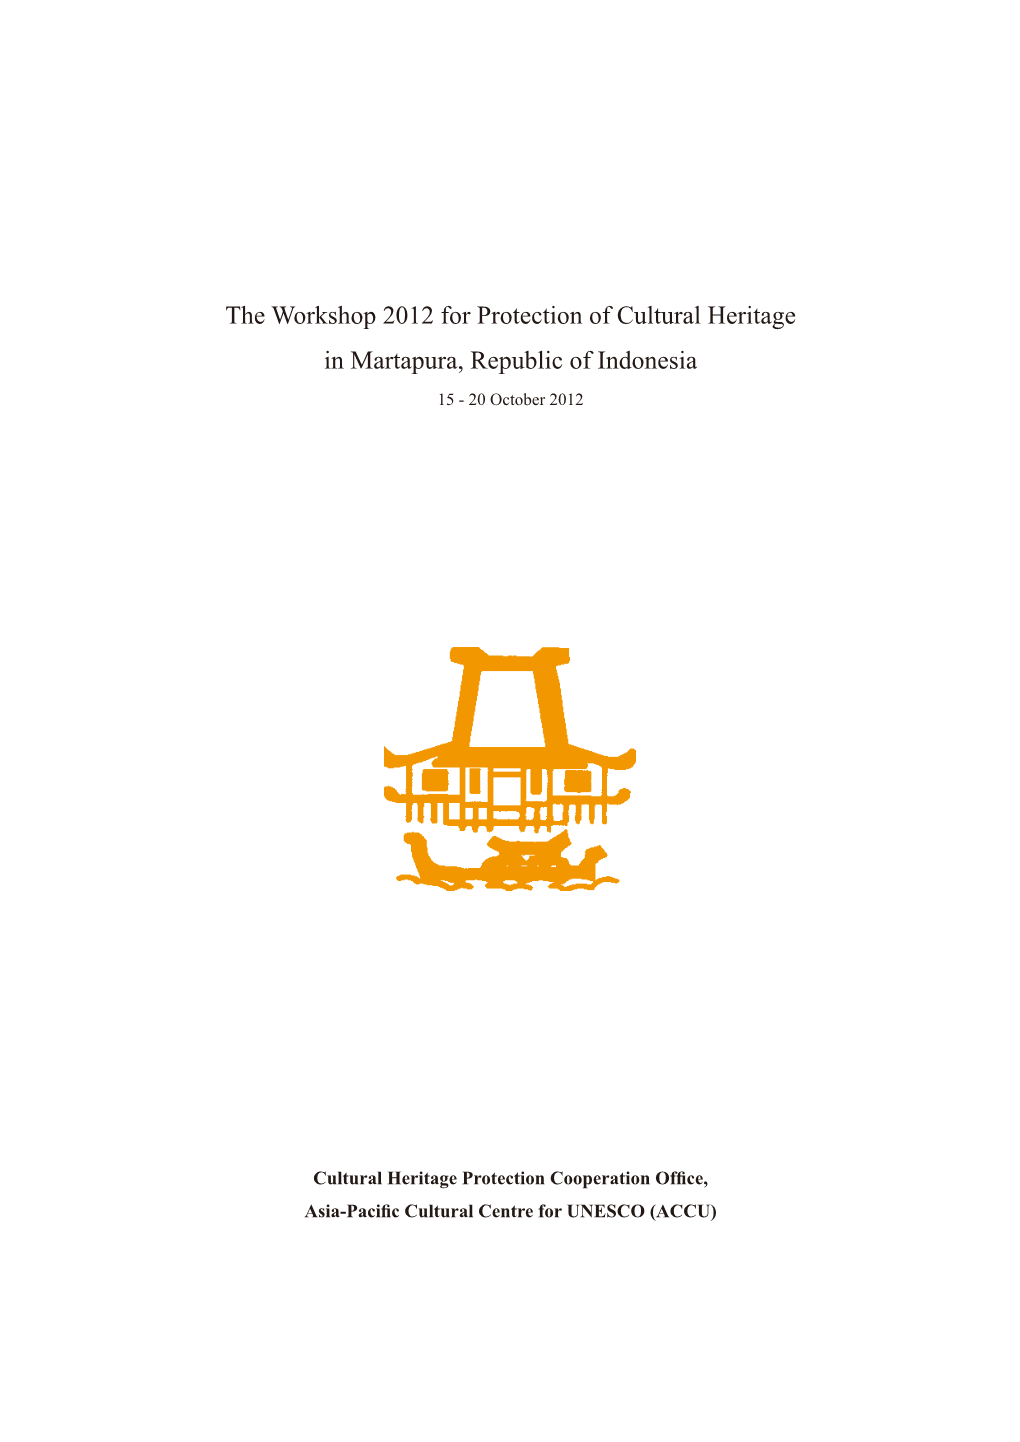 The Workshop 2012 for Protection of Cultural Heritage in Martapura, Republic of Indonesia 15 - 20 October 2012